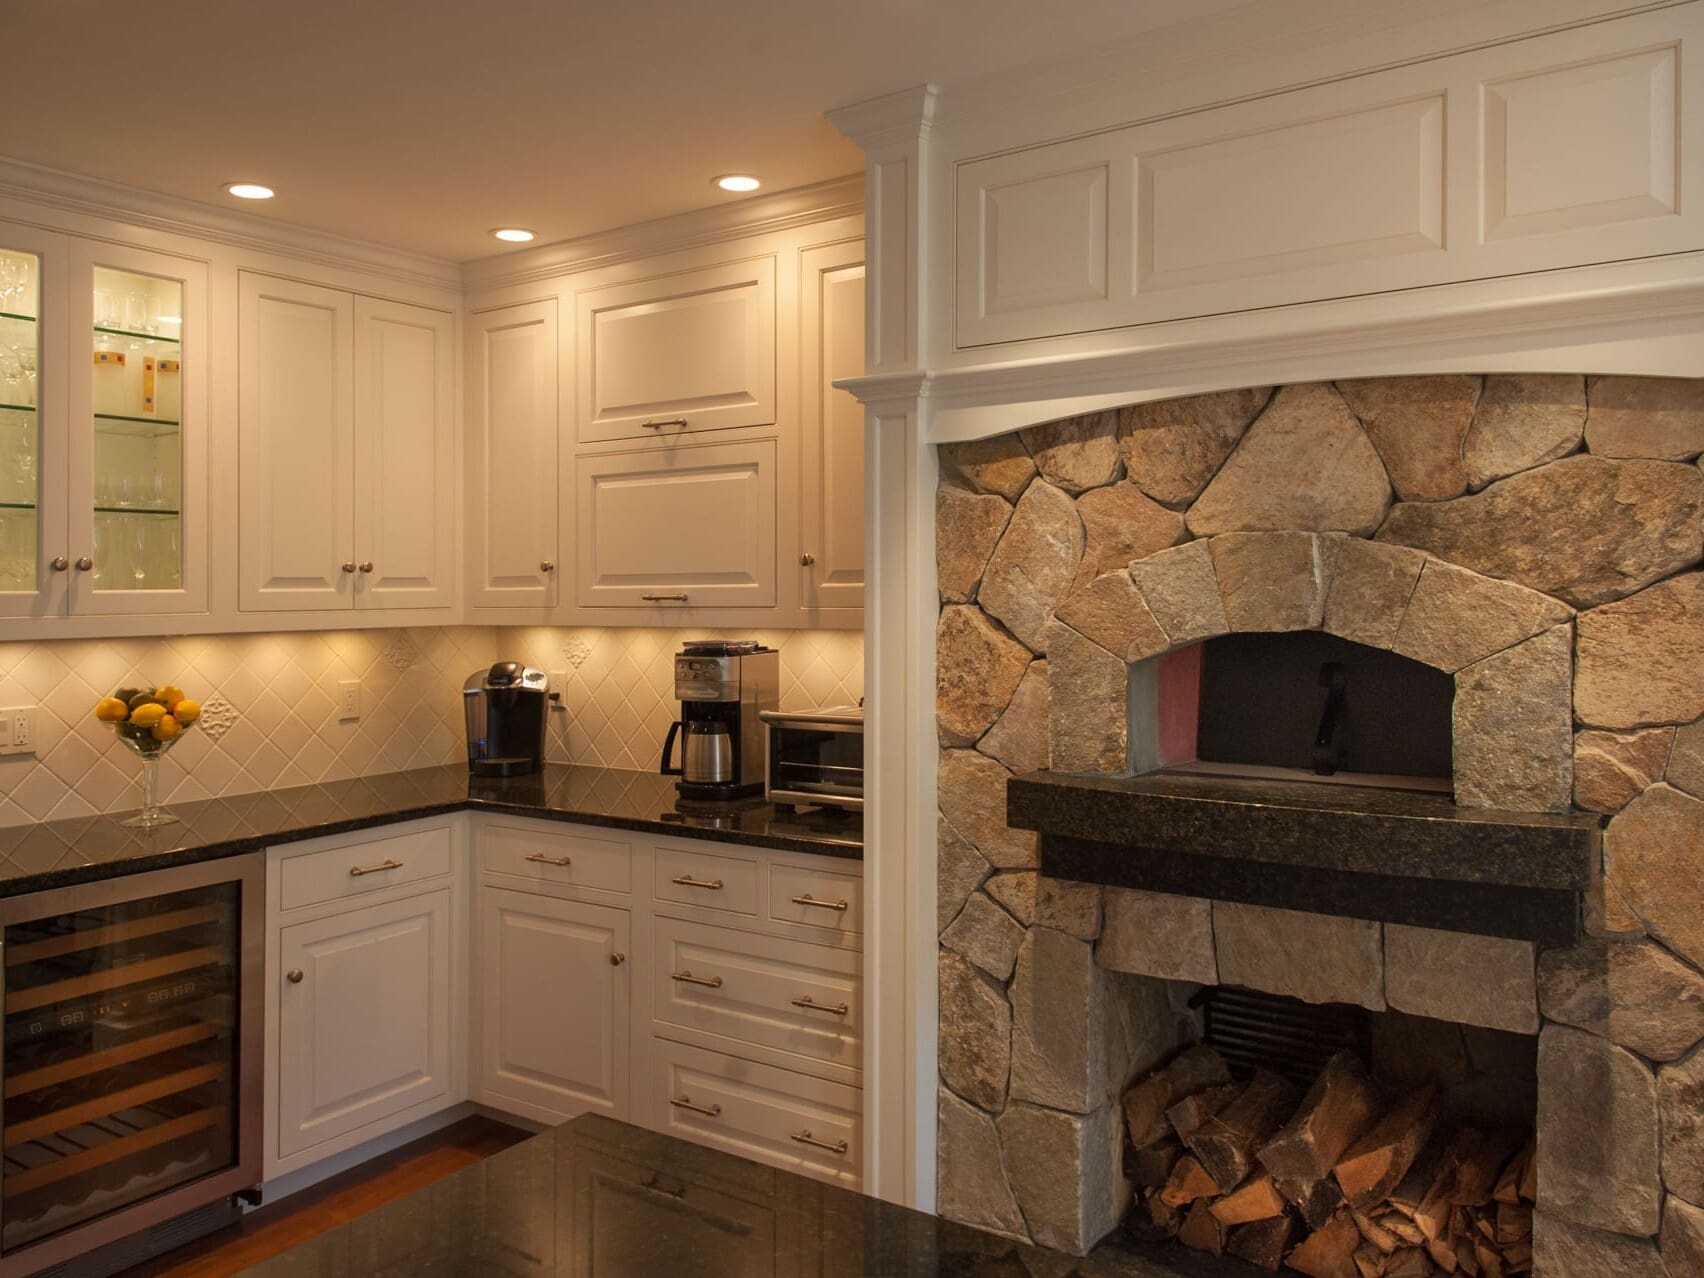 A photo of a kitchen with white raised panel cabinets, black marble countertops, and a built-in, stone wood-fired oven.